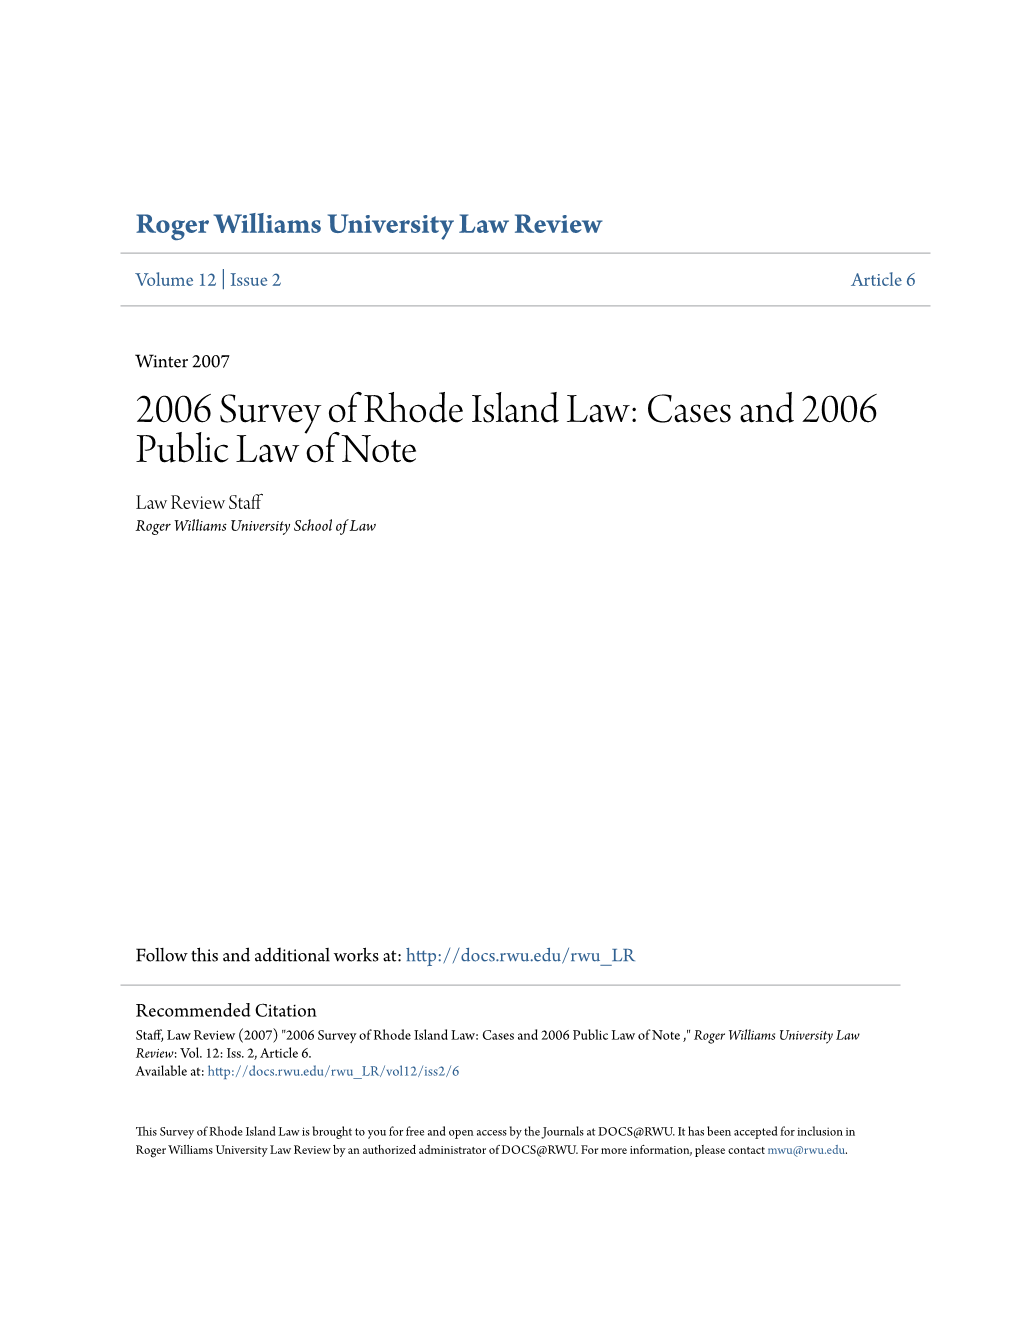 2006 Survey of Rhode Island Law: Cases and 2006 Public Law of Note Law Review Staff Roger Williams University School of Law